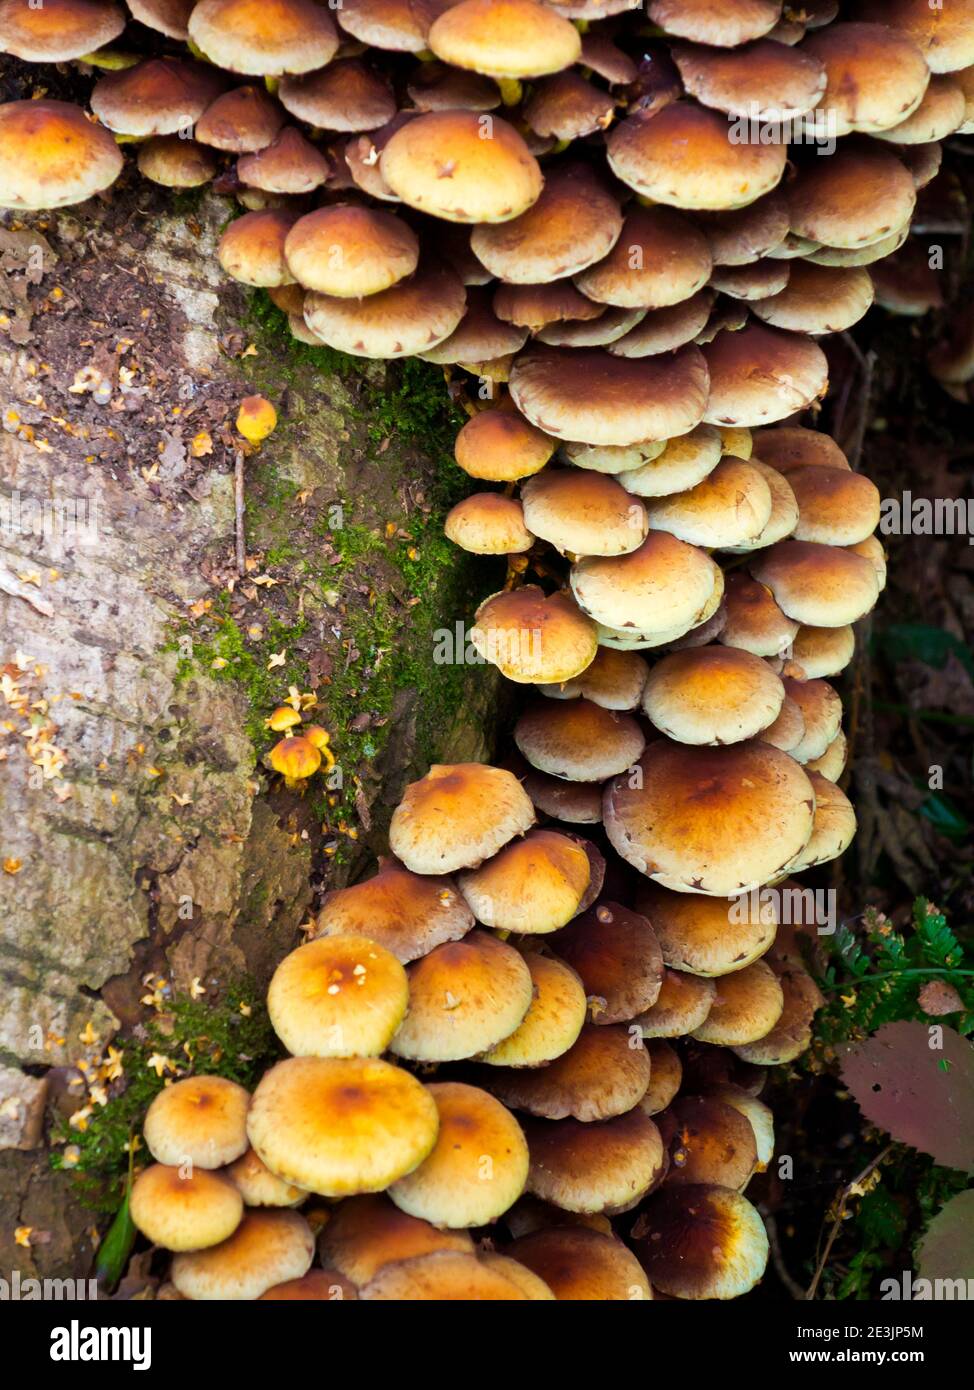 Fungus growing on a tree in a damp woodland environment in early autumn. Stock Photo